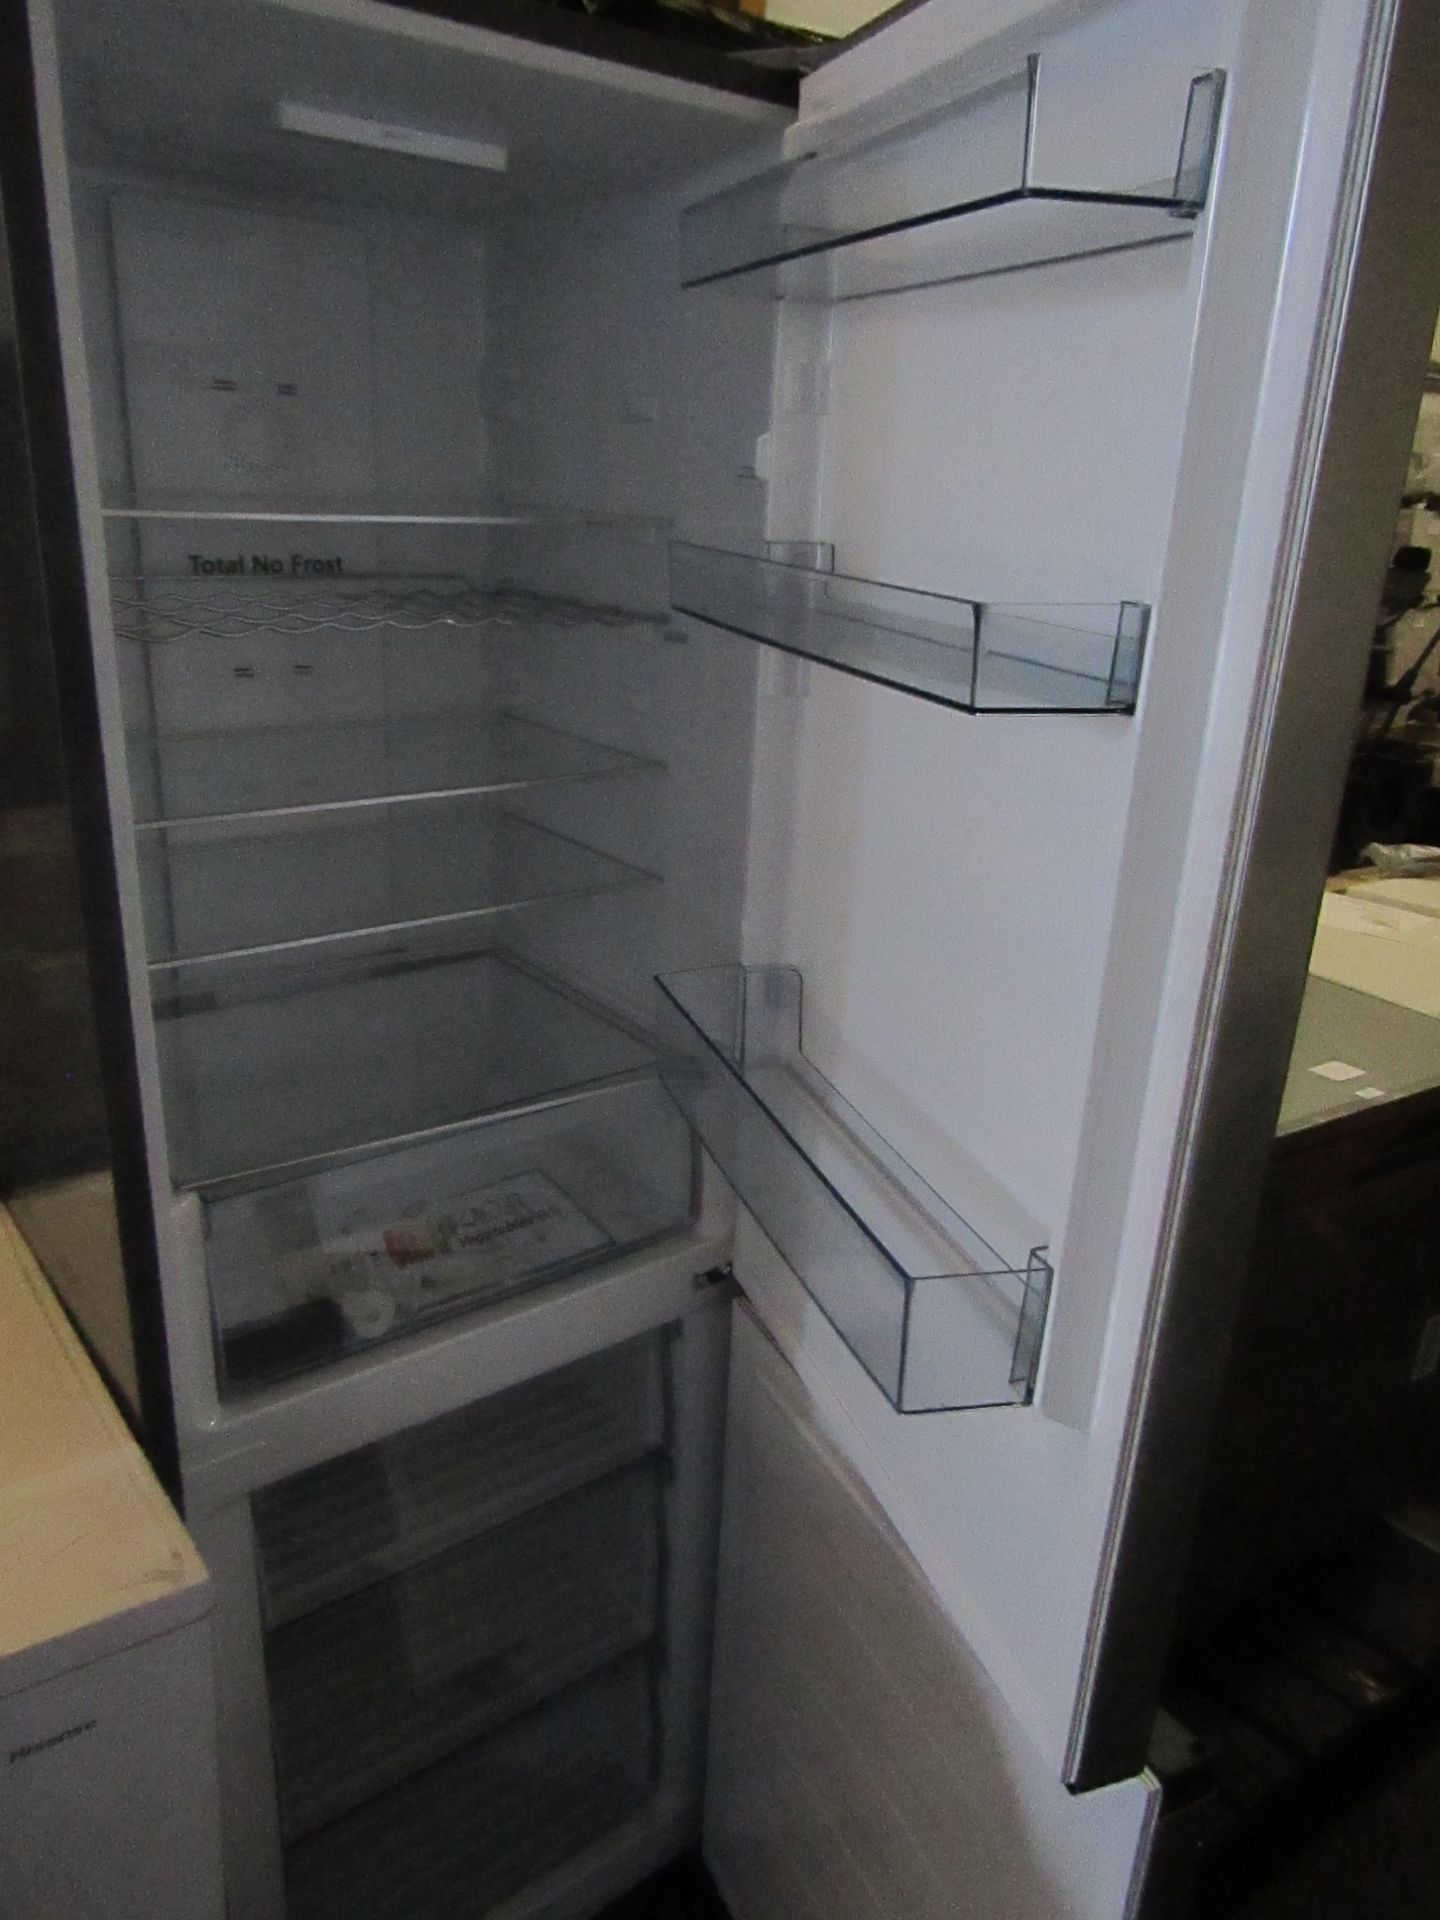 Hisense 60/40 fridge freezer, tested working for coldness, has a few scraps and marks on the - Image 4 of 4